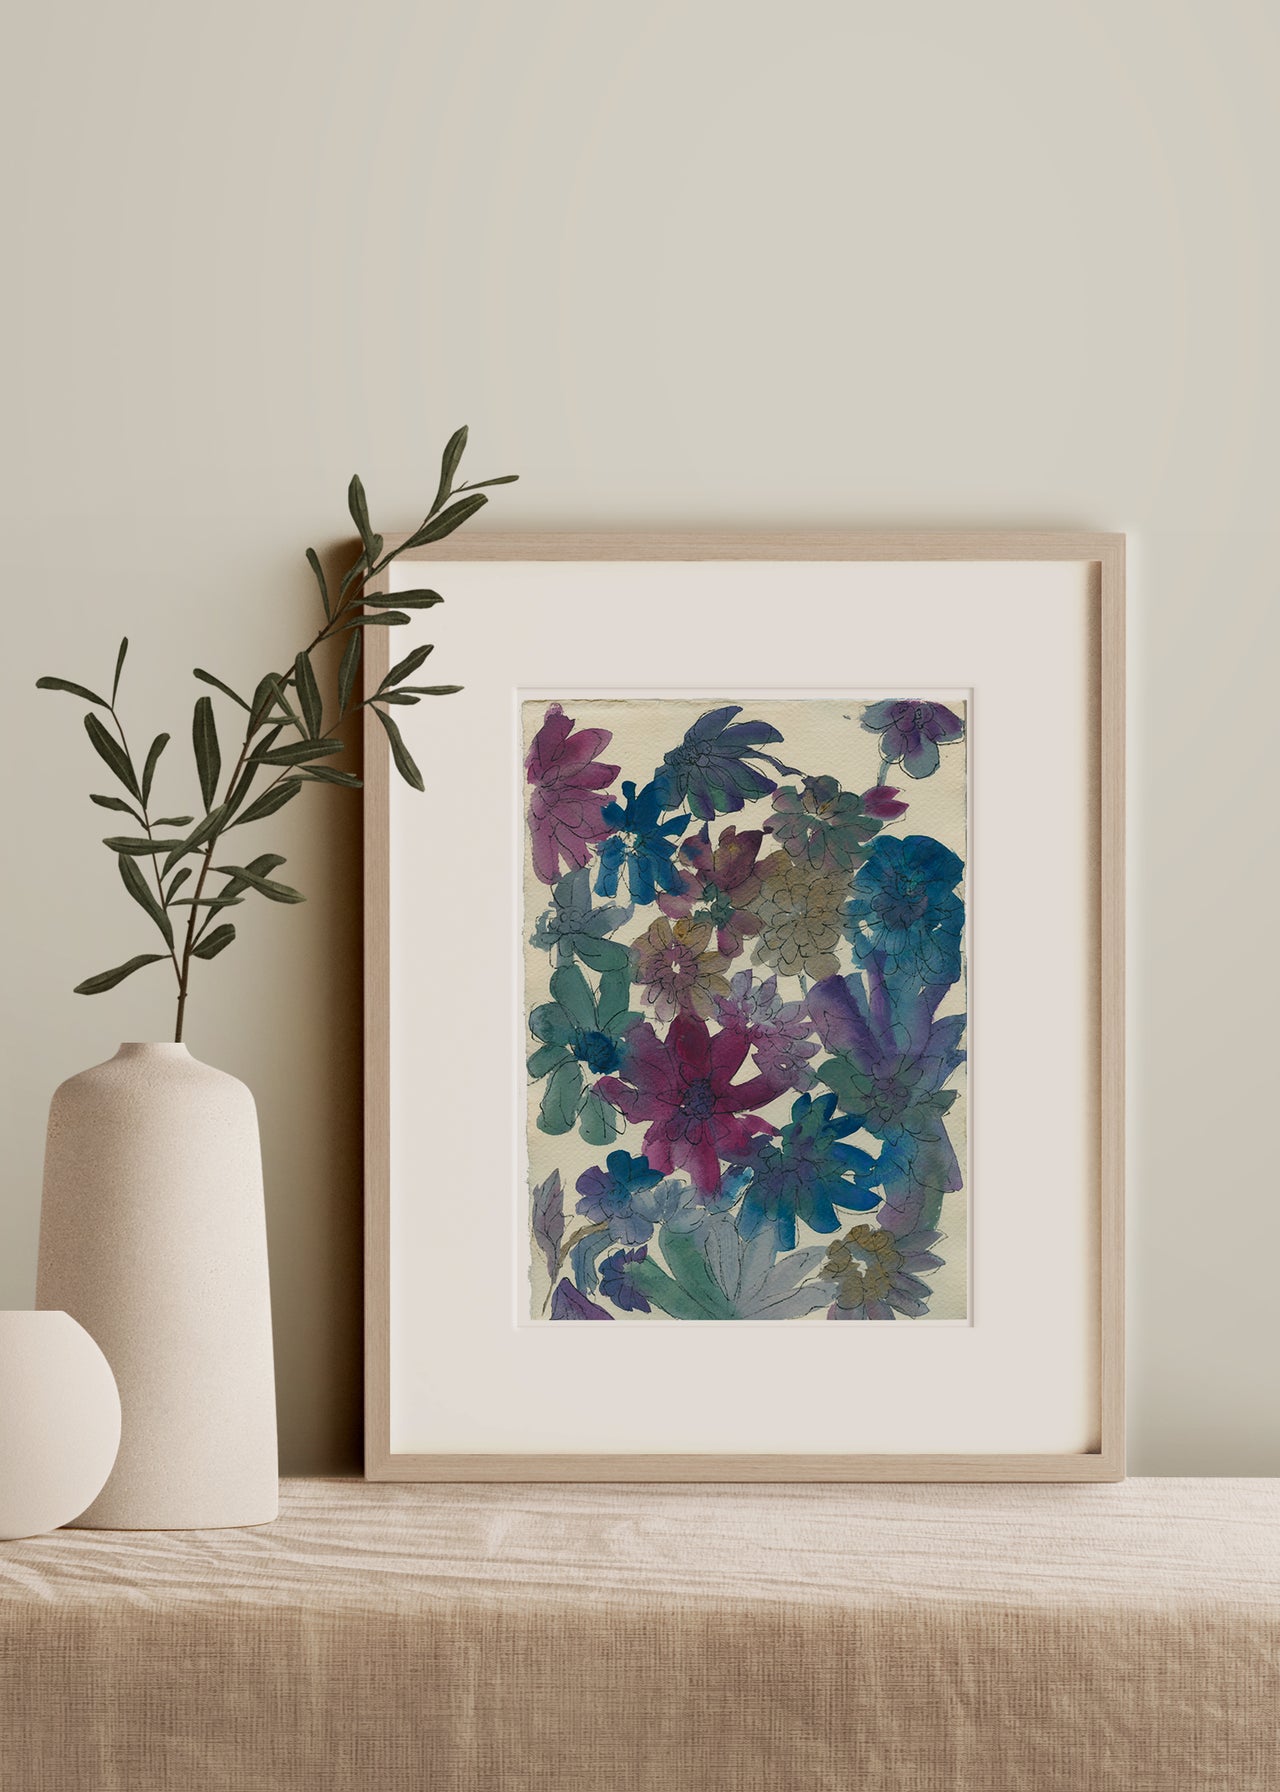 Artist Lucy Williams ink painting of flowers in tones of blue, purple